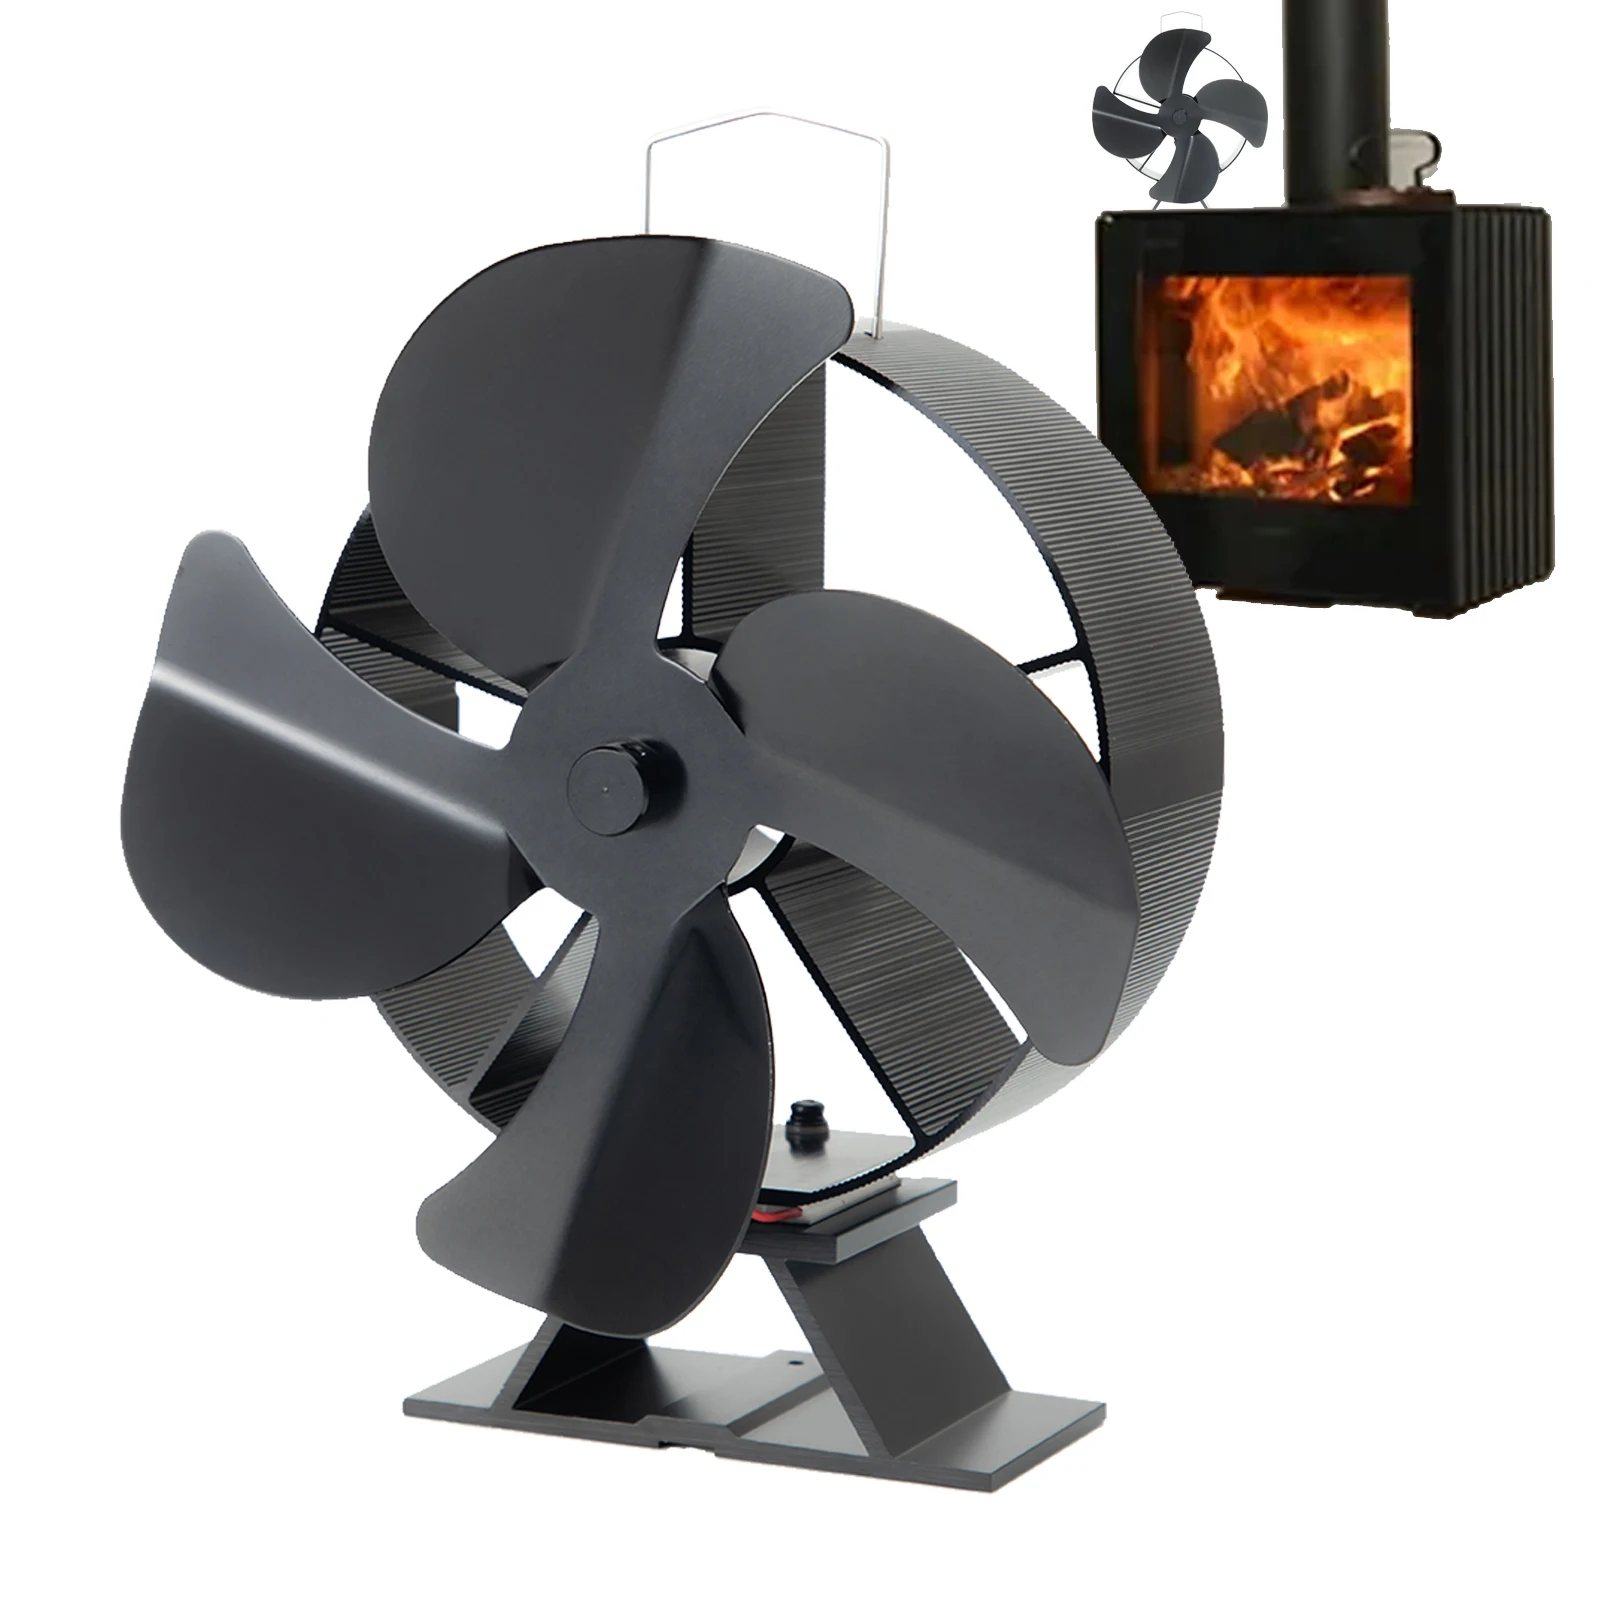 

Wood Stove Fan Fireplace Fan For Wood Burning Stove Thermal Fans For Wood/Log Burner/Fireplace No Electricity Required Efficient